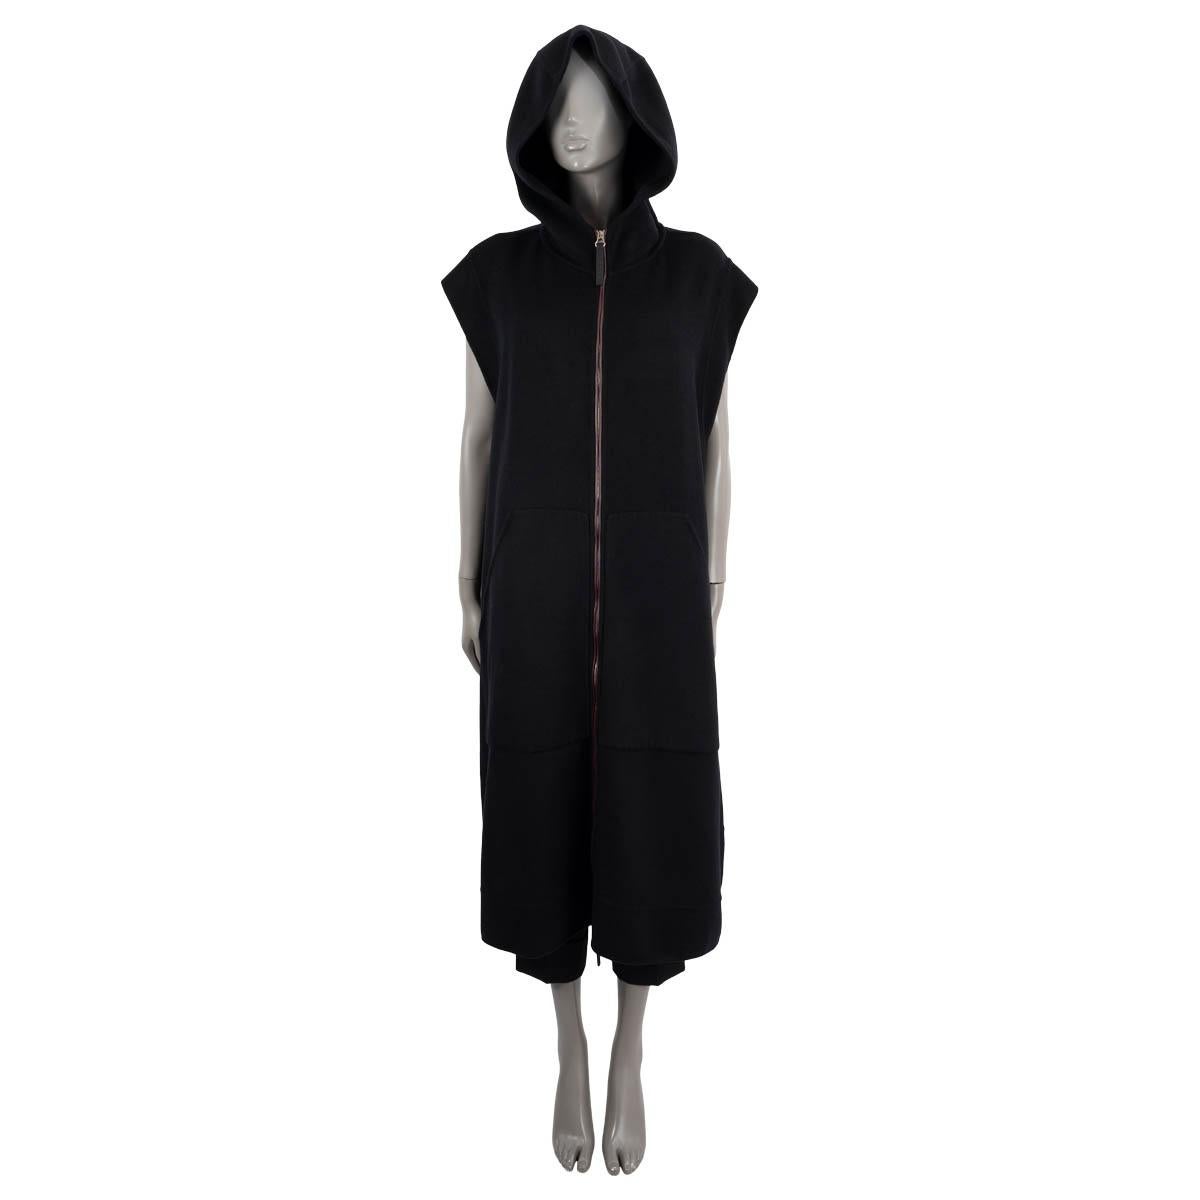 100% authentic Marni sleeveless long vest coat in black cashmere (98%) and polyamide (2%). Features a hood and kangaroo pockets at front. The zipper is trimmed in burgundy lambskin leather with a black leather zipper pull. Unlined. Has been worn and